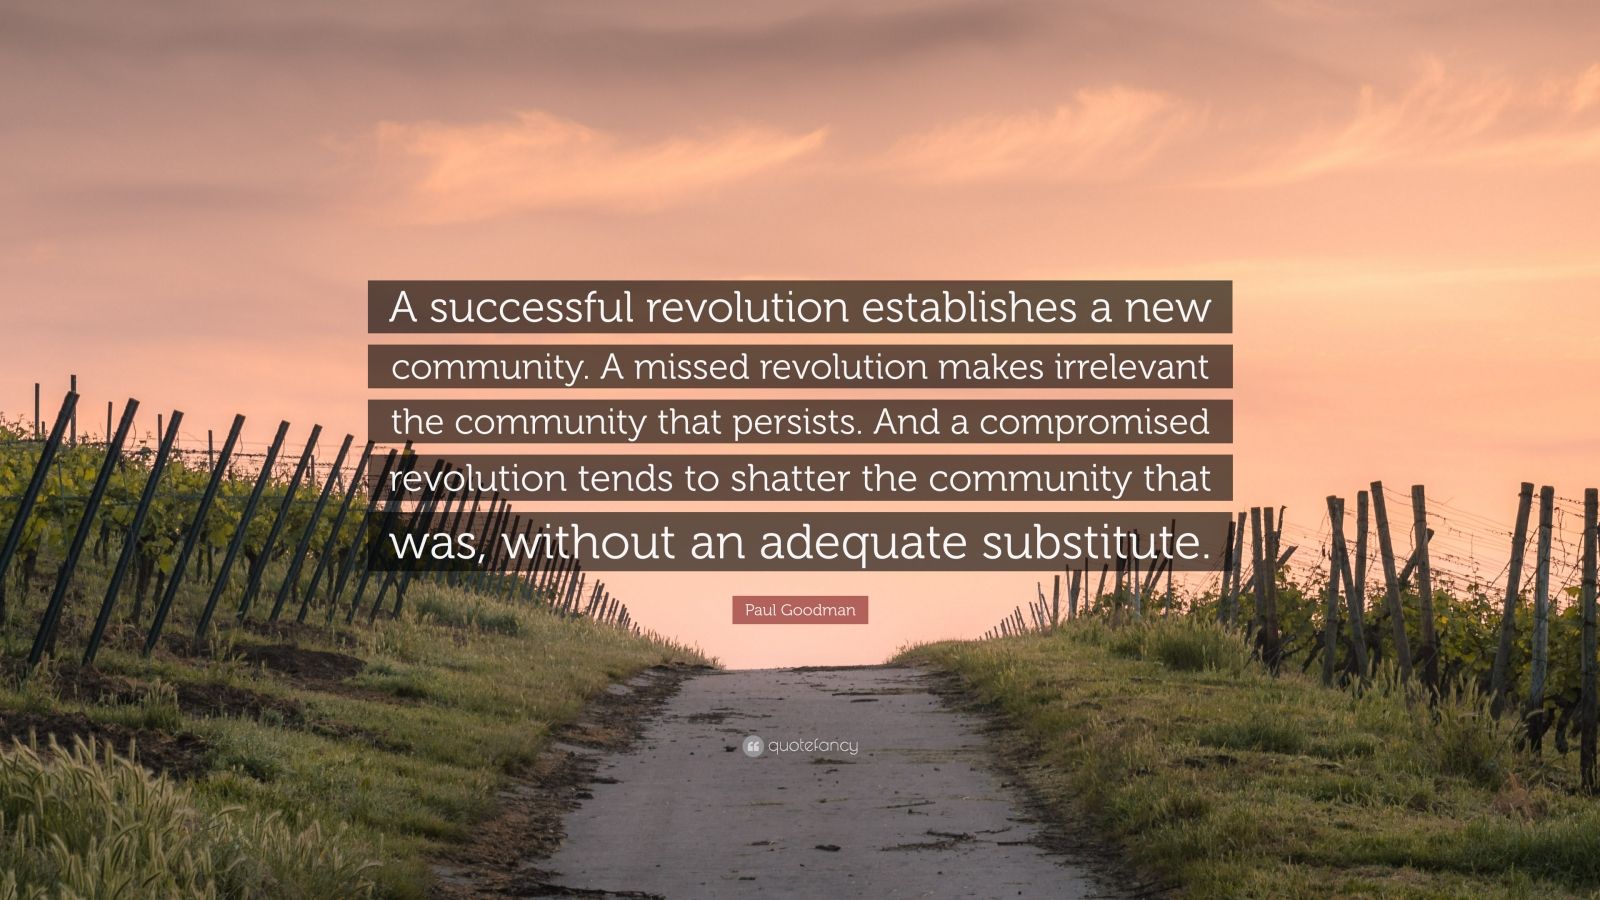 Paul Goodman Quote: “A successful revolution establishes a new community. A  missed revolution makes irrelevant the community that persists. A”